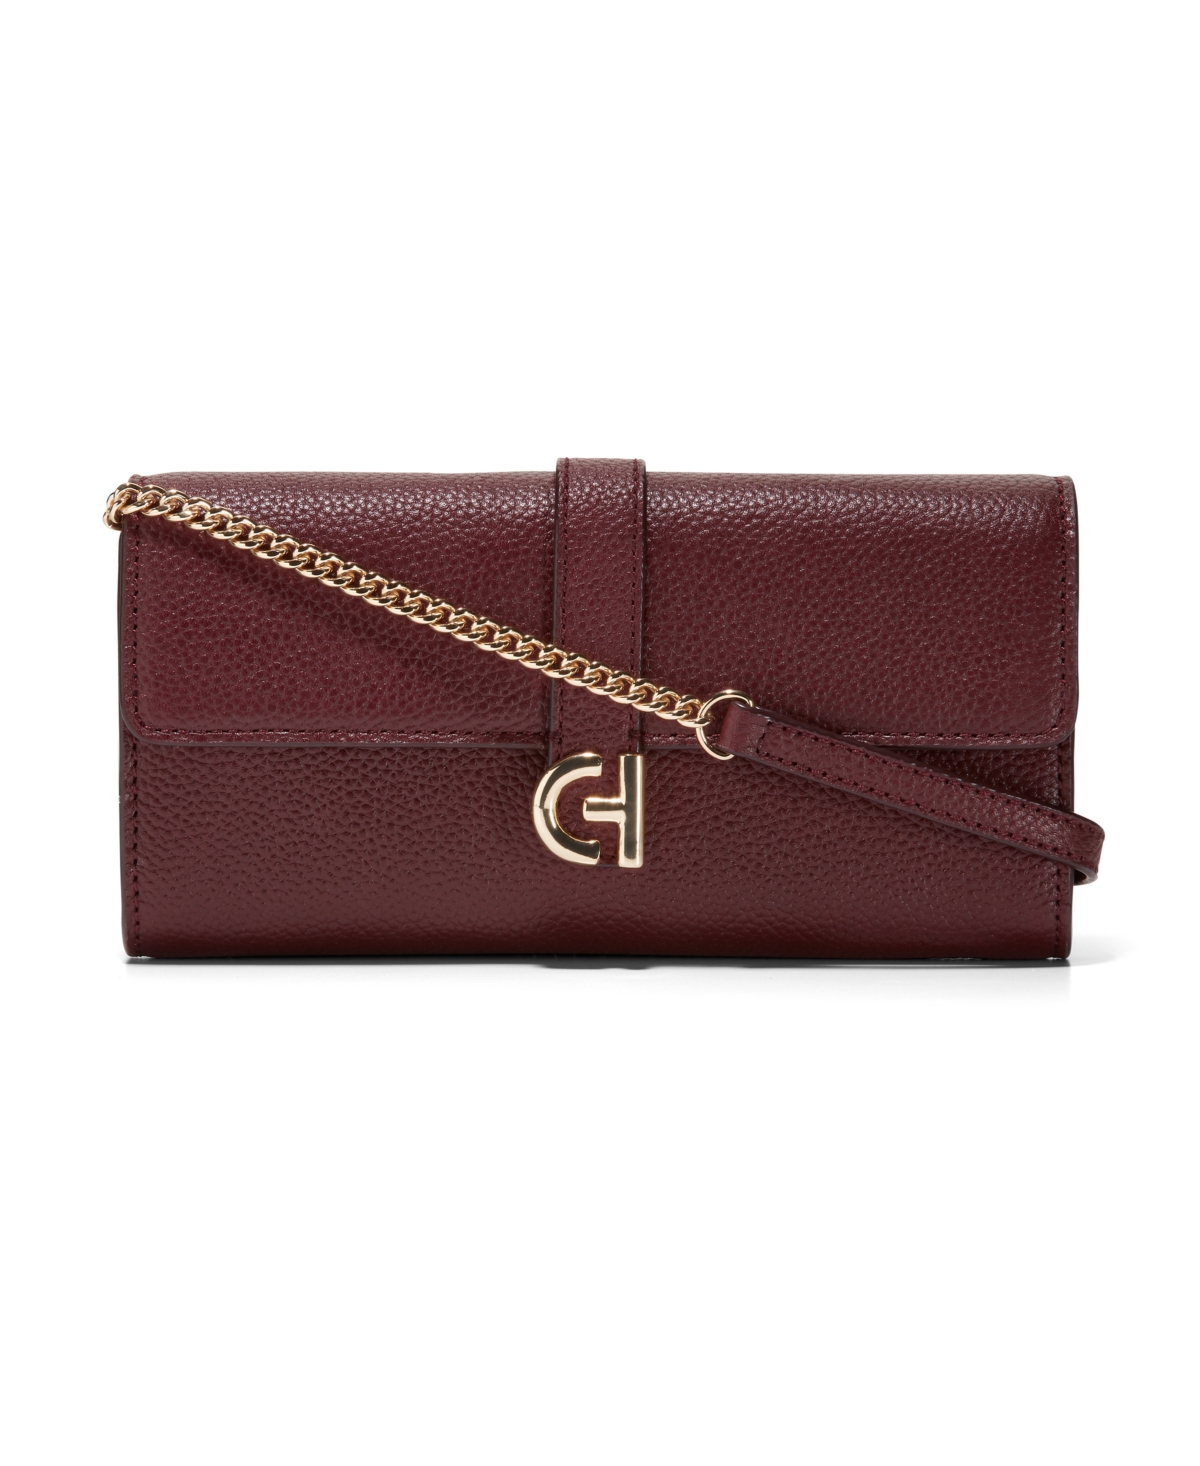 COLE HAAN LEATHER WALLET-ON-A-CHAIN